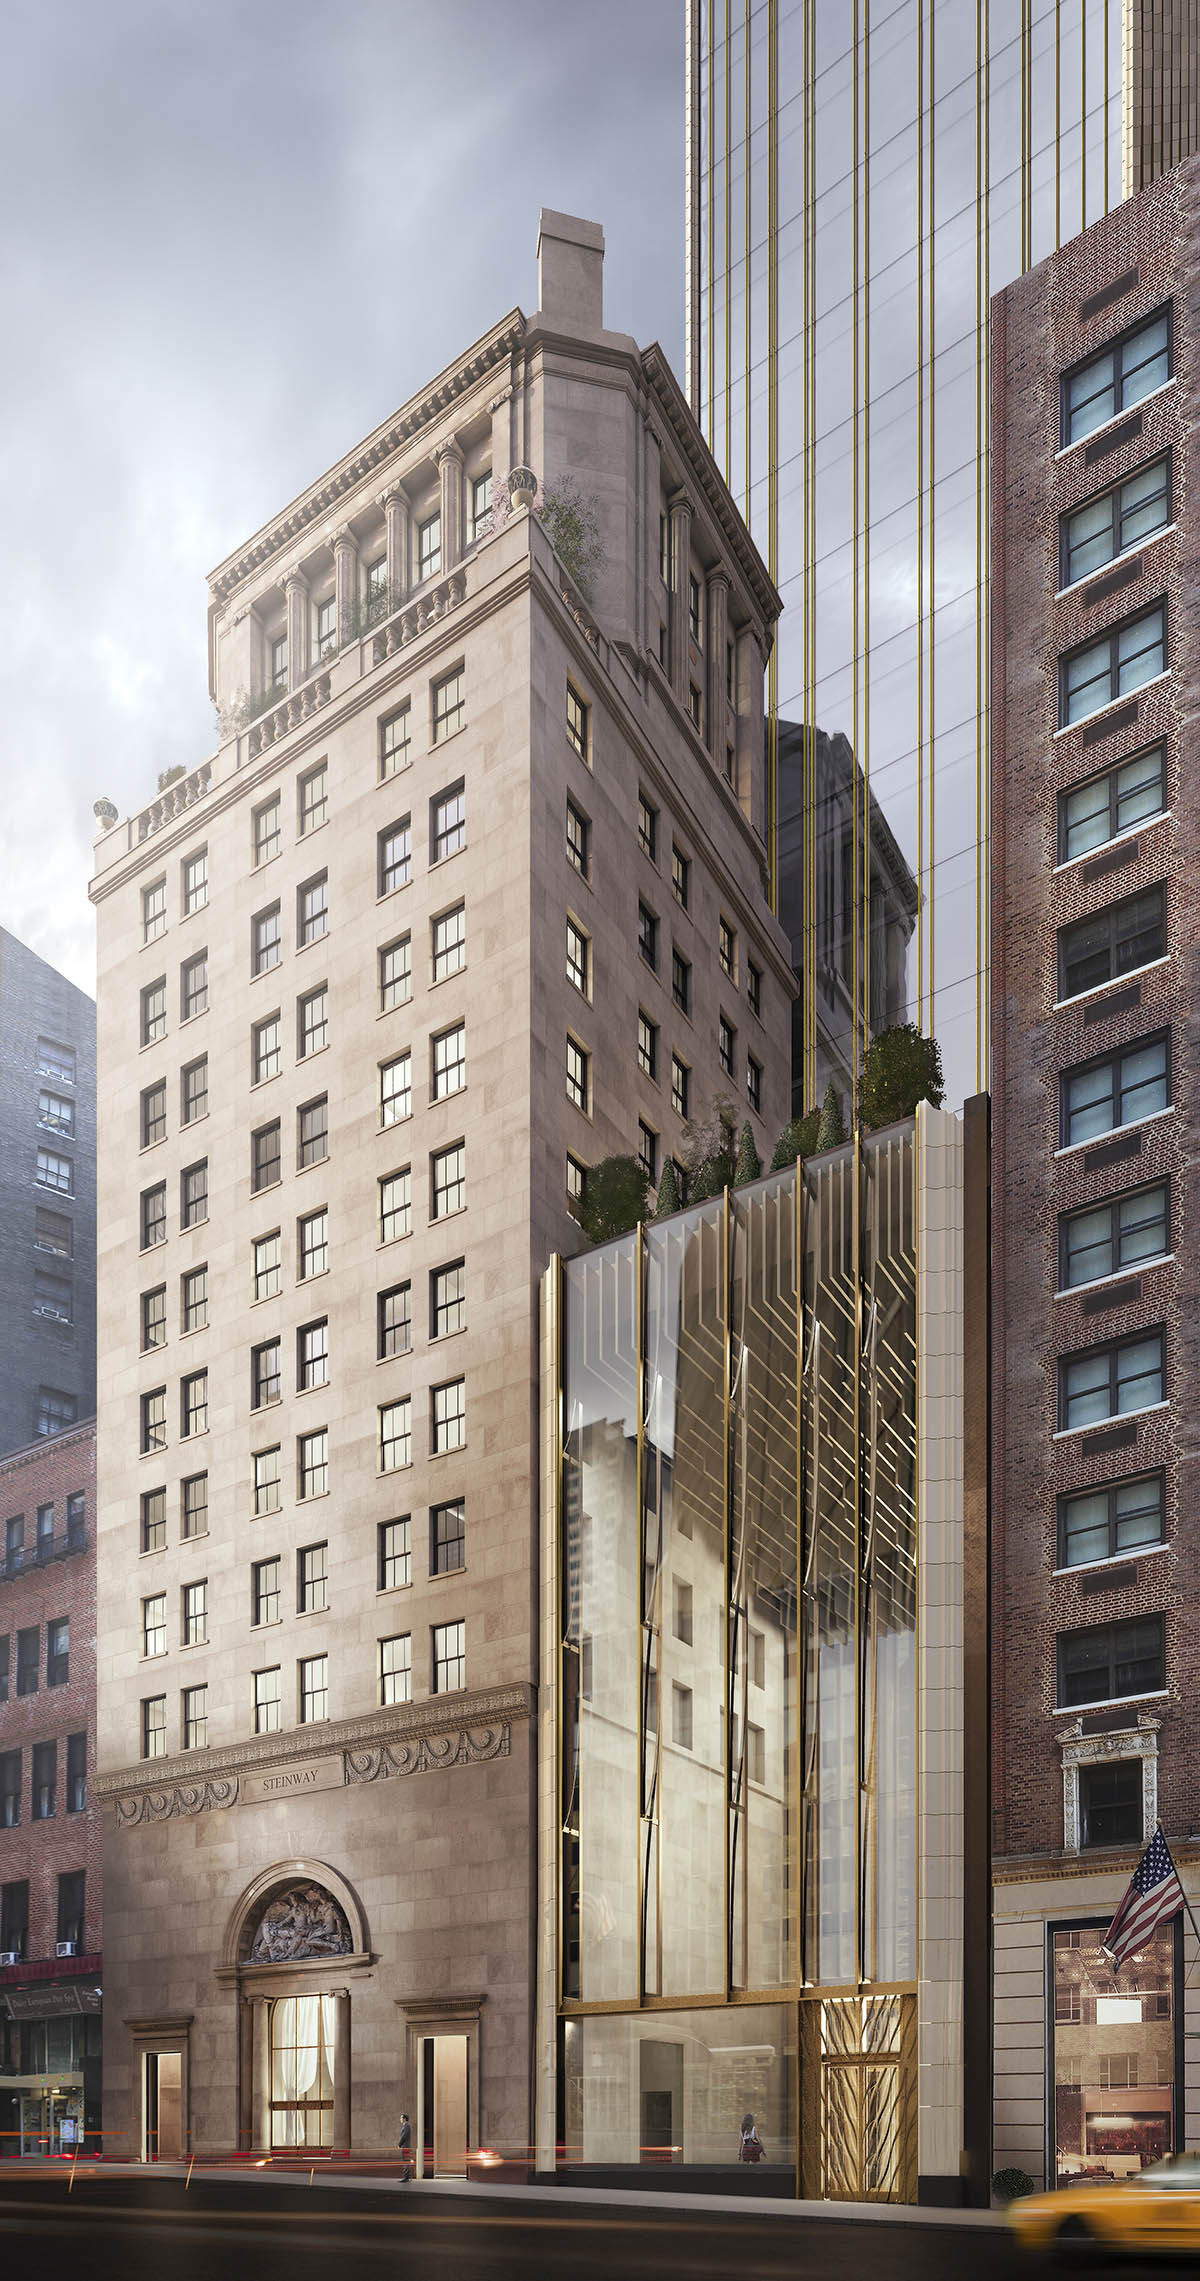 111 W. 57th St: Architects' and Engineer's Presentations 